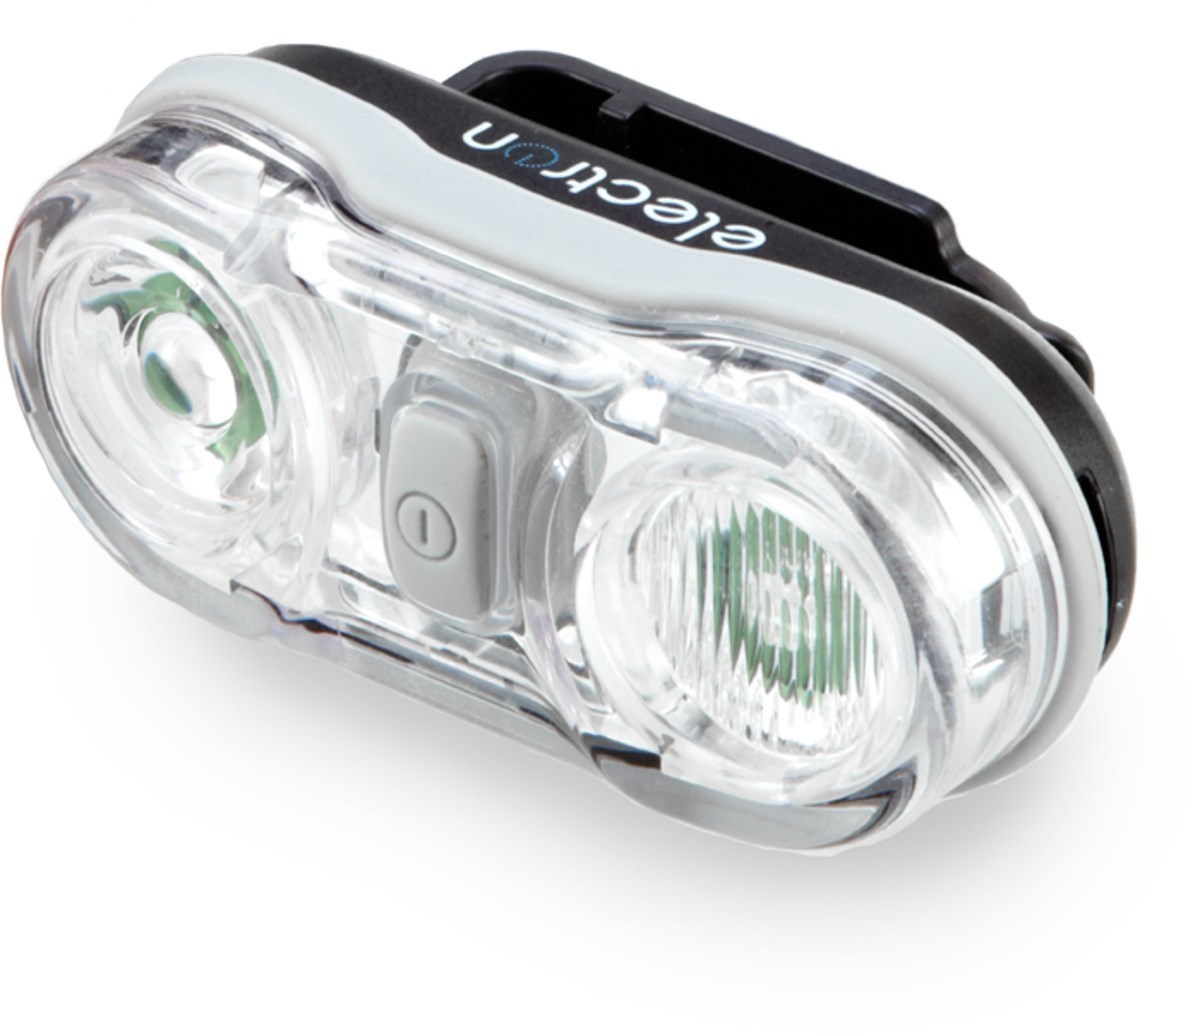 Electron Pico Super 2 Front Safety Light product image